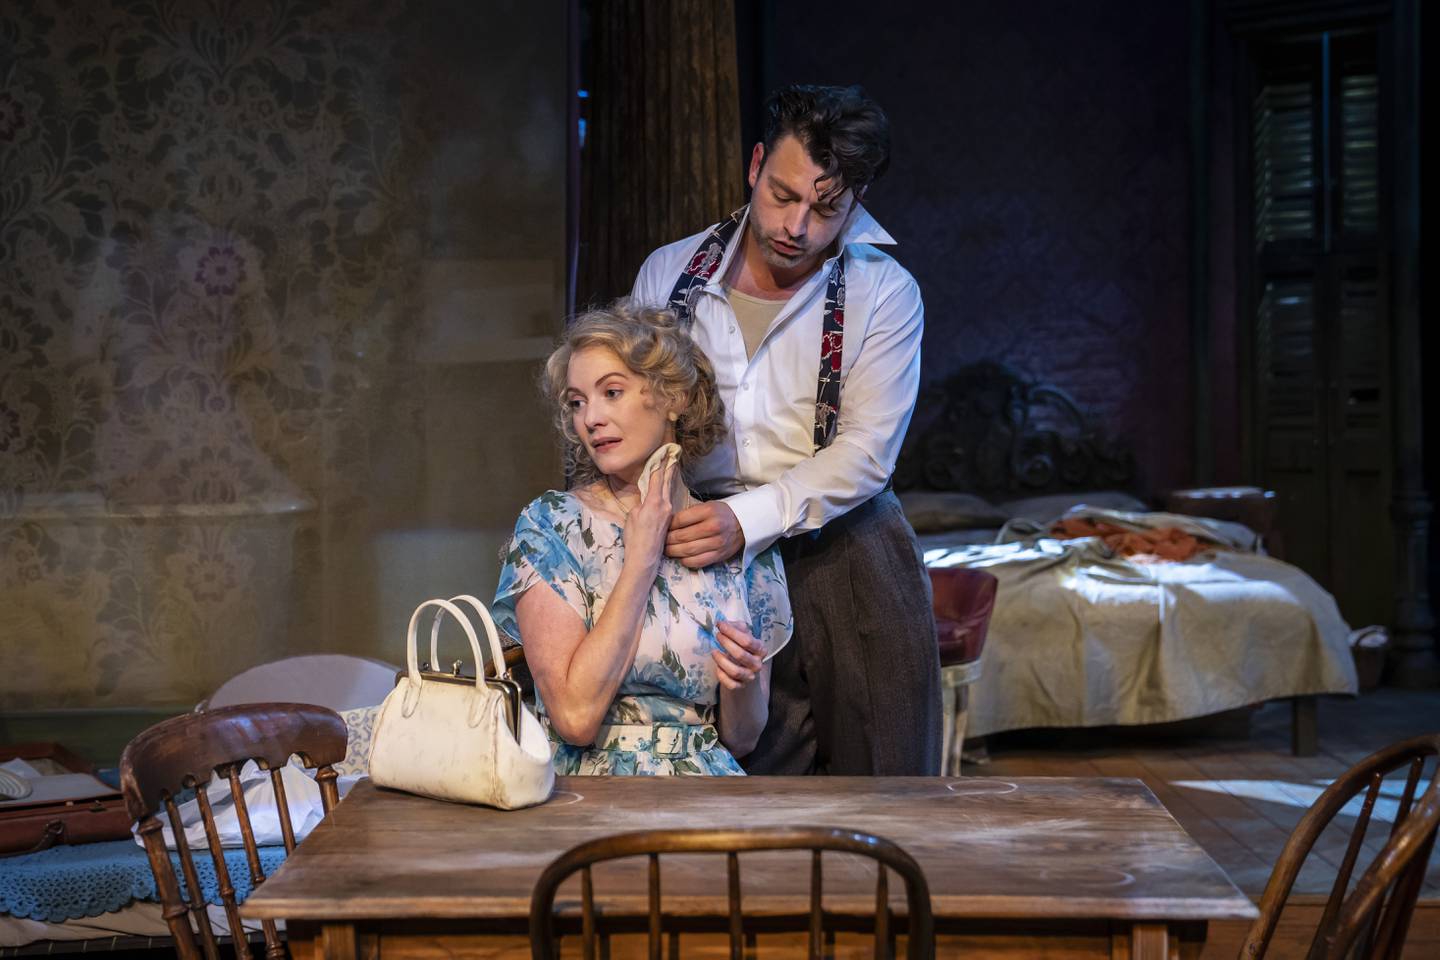 Amanda Drinkall (left) plays Blanche and Casey Hoekstra is Stanley in A Streetcar Named Desire by Tennessee Williams, Paramount Theatre’s 2023-24 BOLD Series finale. Performances are March 13-April 21, 2024 at Paramount’s Copley Theatre, 8 E. Galena Blvd. in downtown Aurora. Tickets: paramountaurora.com or (630) 896-6666. Credit: Liz Lauren